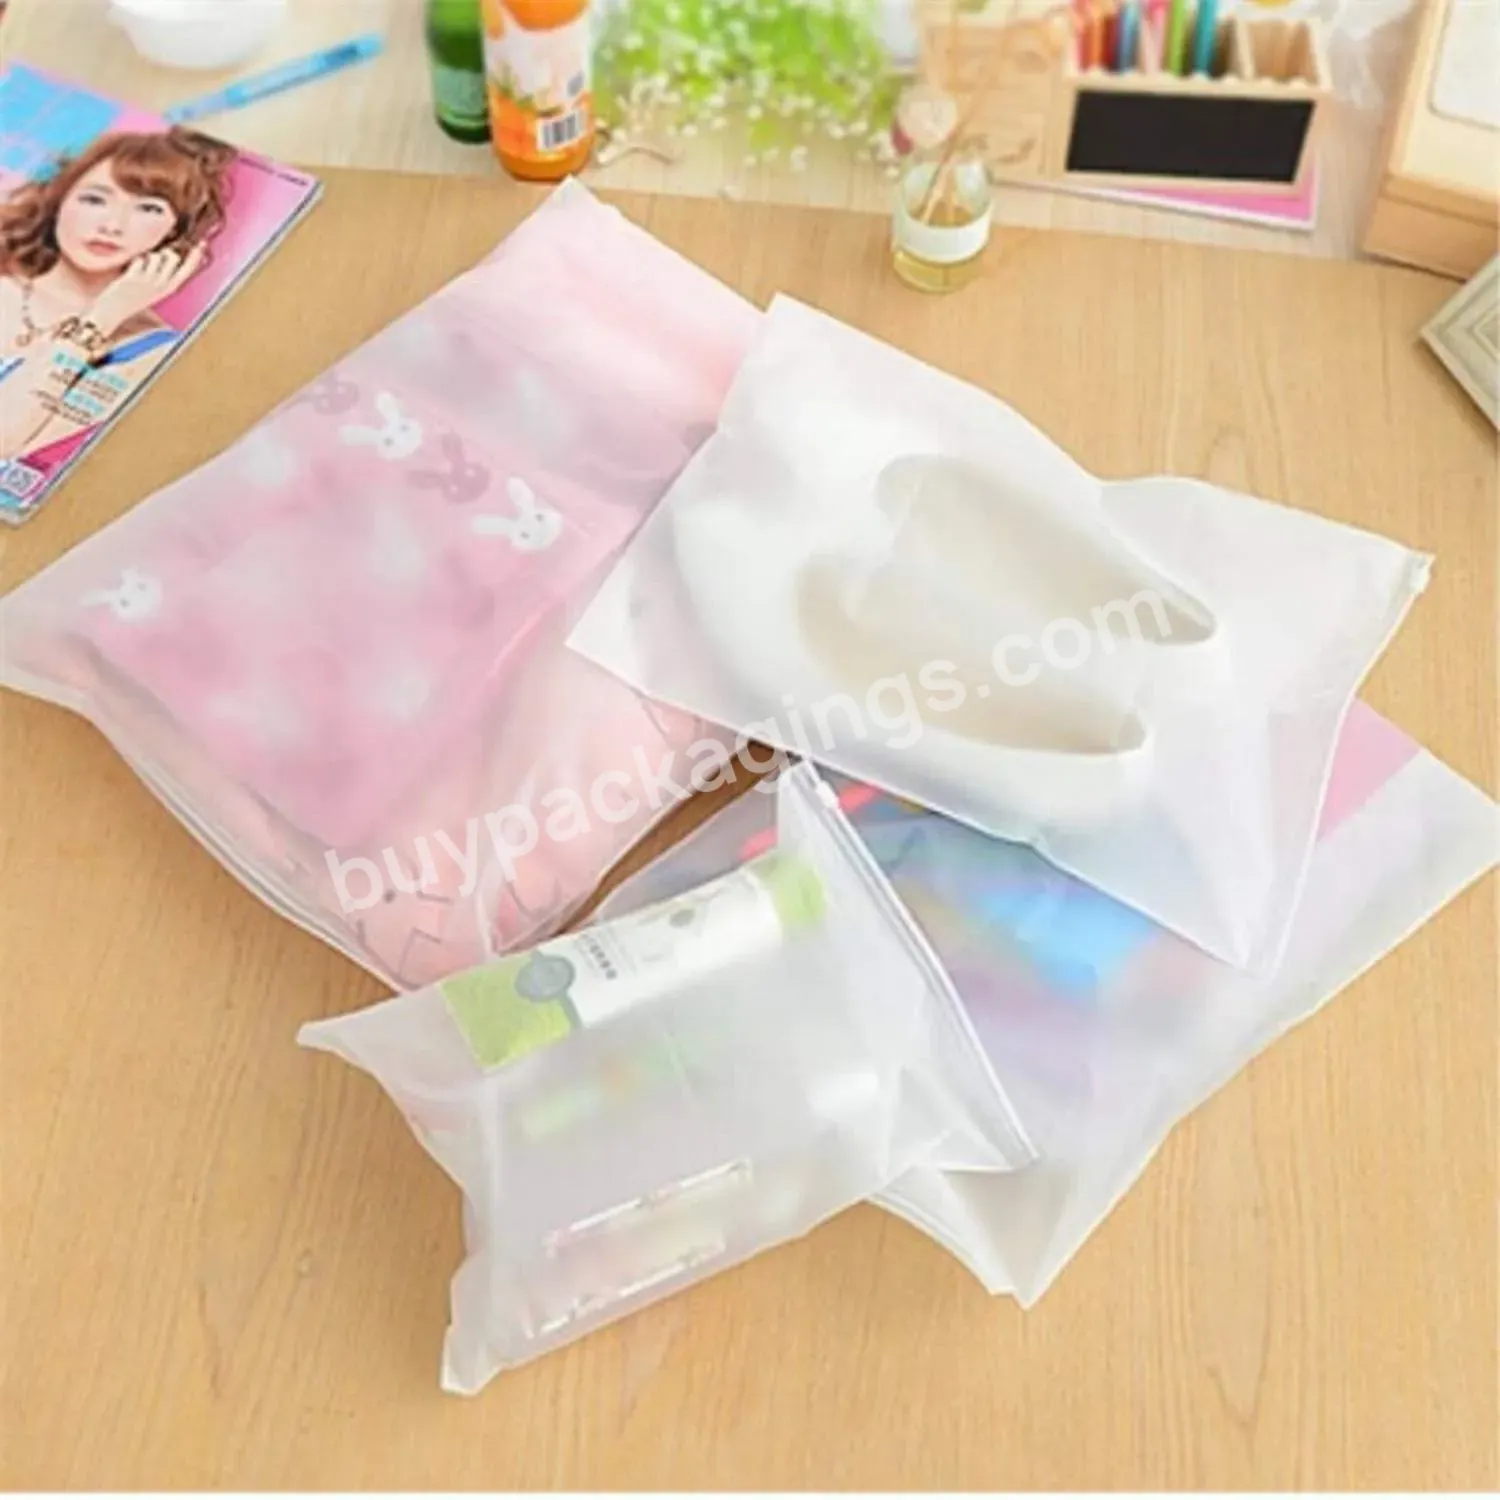 Waterproof Pouch Frosted Cpe Plastic Soft Transparent Bags For Suit Clothes Shoes - Buy Cpe Soft Transparent Bags For Shoes,Waterproof Cpe Soft Bags For Cloth,Frosted Plastic Bag For Kindling Wood.